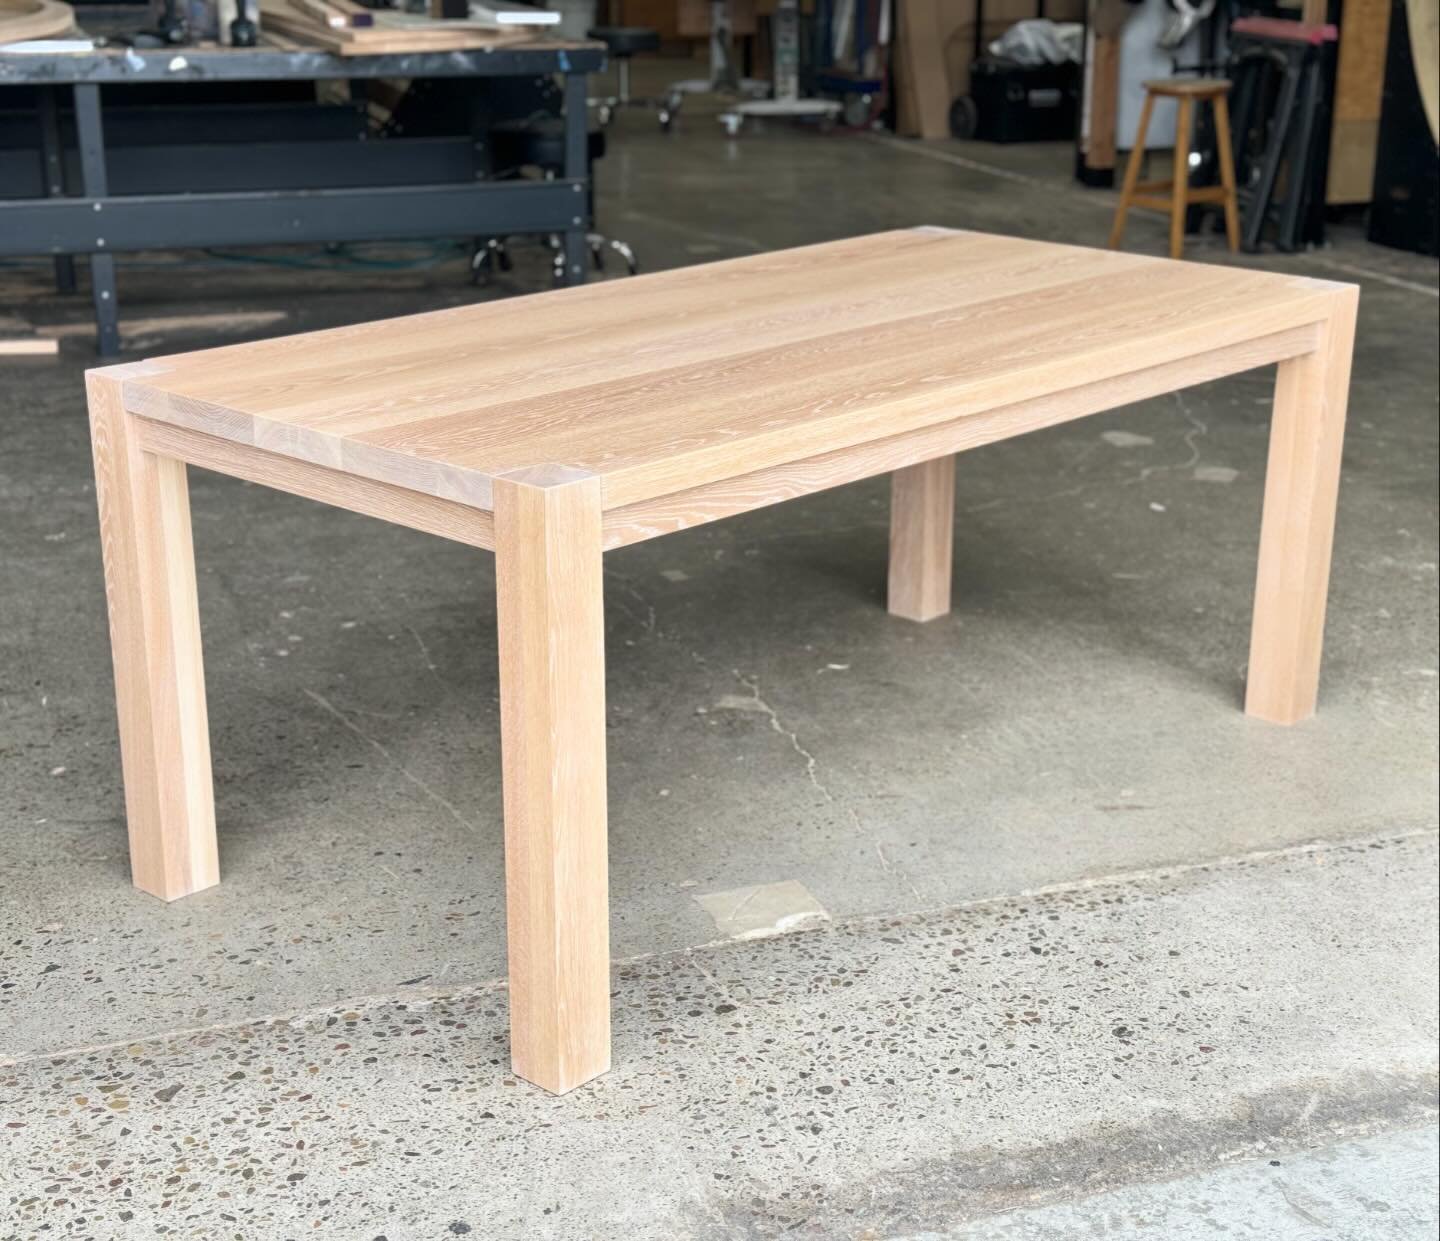 Just wrapped up our first Parsons style table.
I can&rsquo;t believe it has taken this long to be requested!
We used solid White Oak and finished it with a very subtle white finish. Beautiful clean lines.
Dimensions- 72x36&rdquo; x30&rdquo;
&mdash;&m